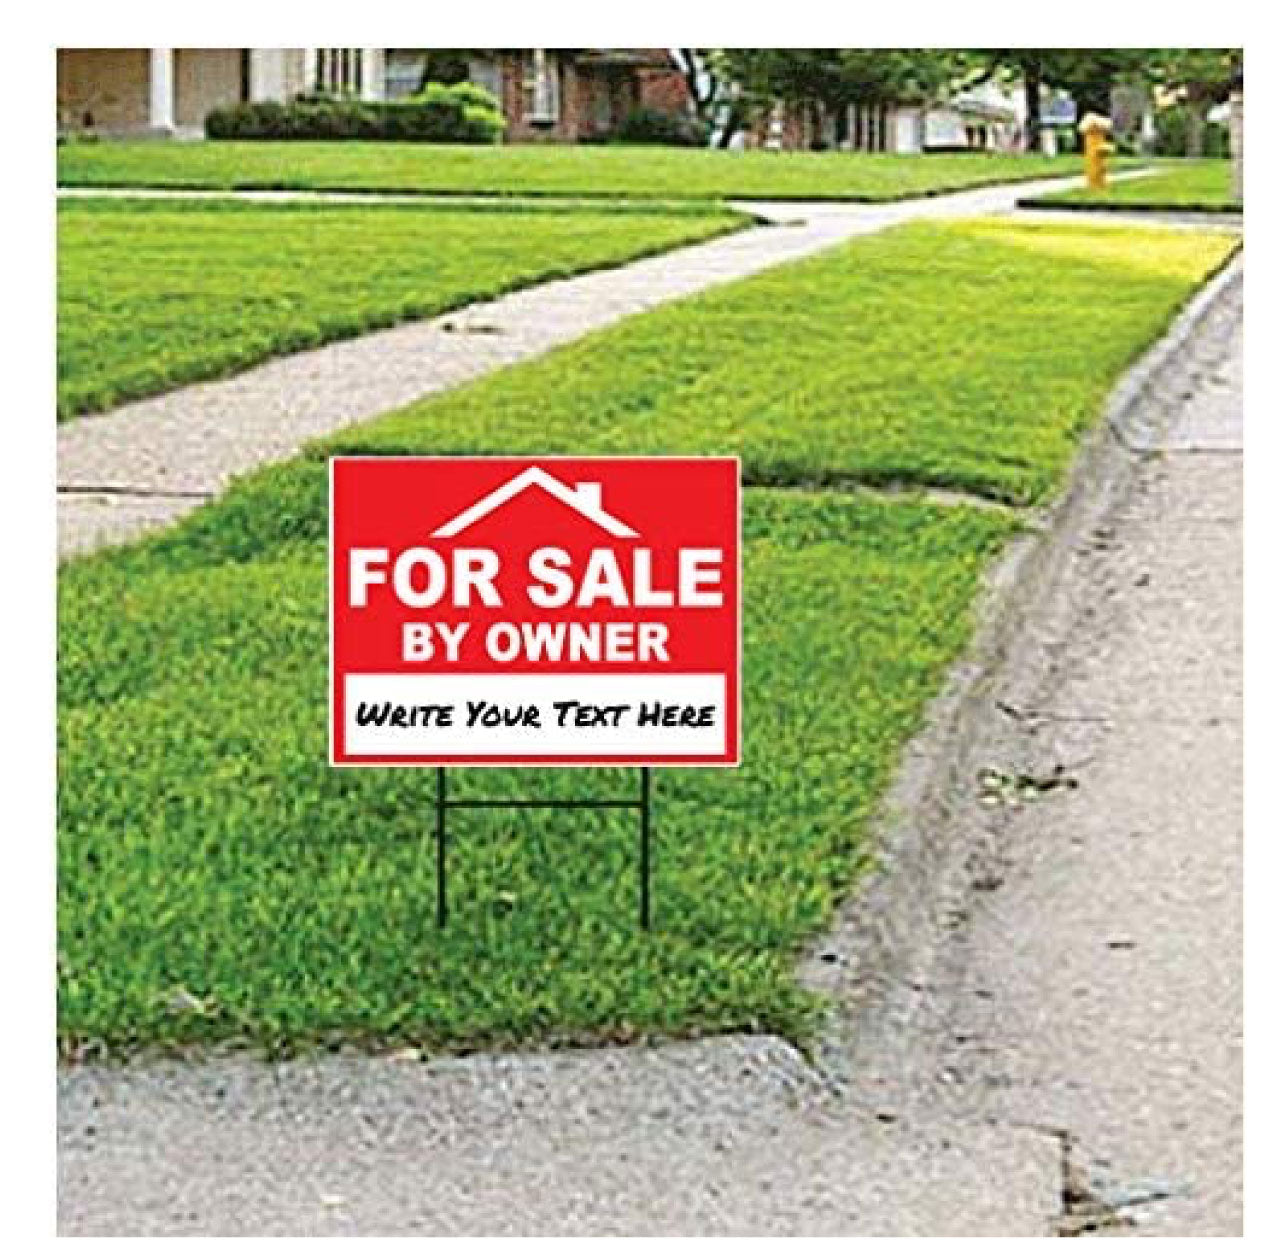 Humanity Source Yard Sign For Sale by Owner